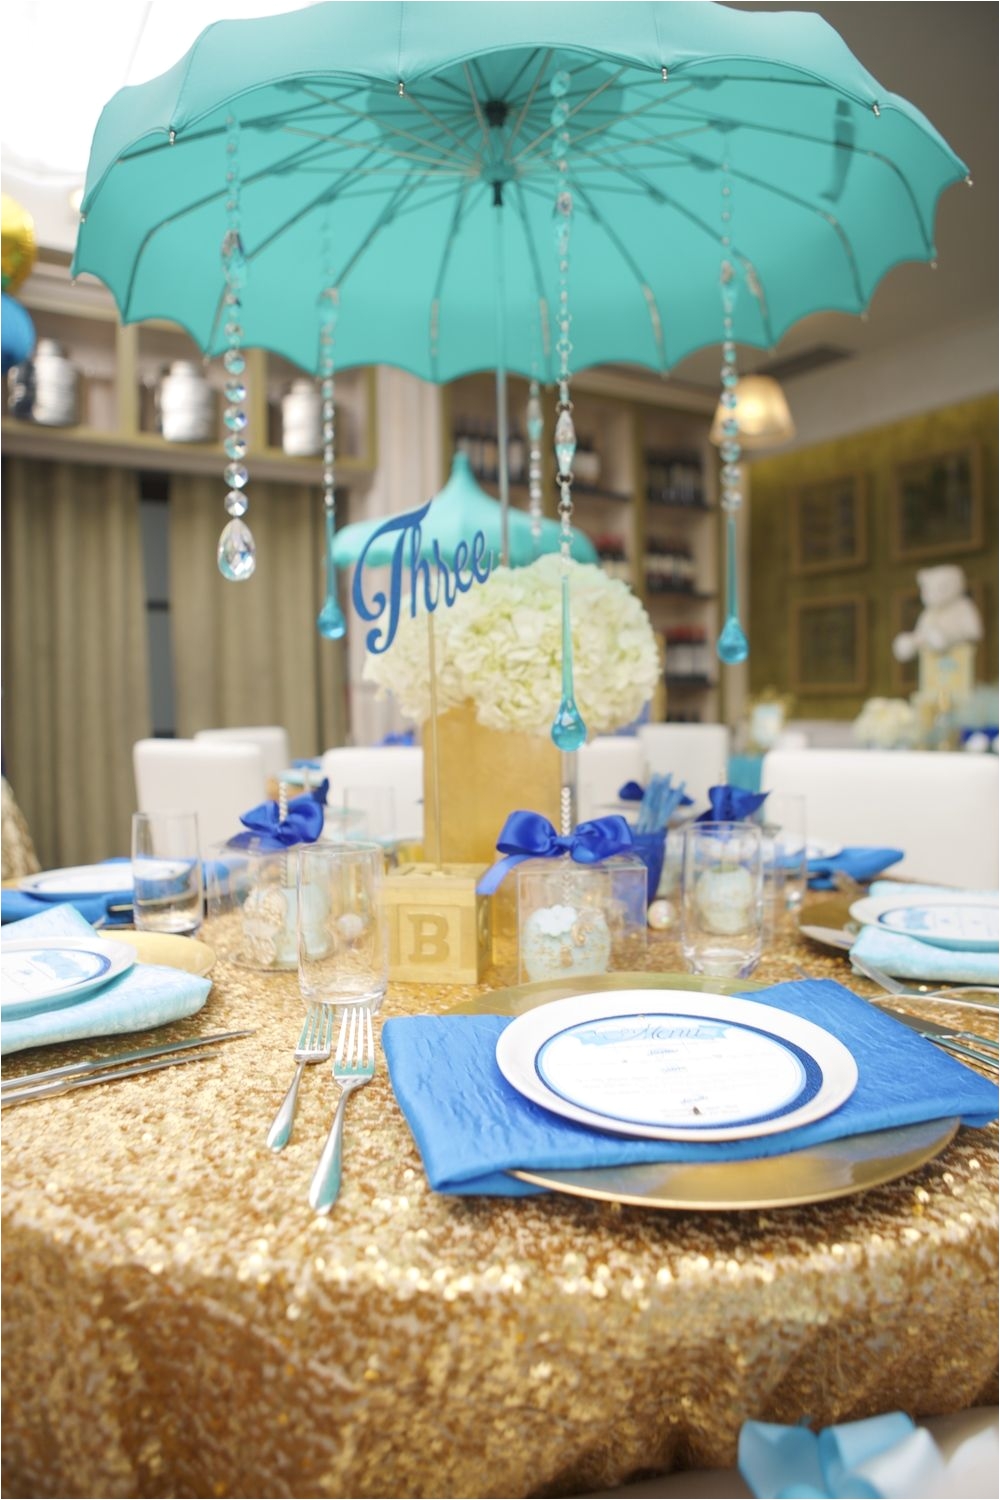 Royal themed Baby Shower Chair Umbrella Centerpieces for Baby Shower Blue White and Gold Baby